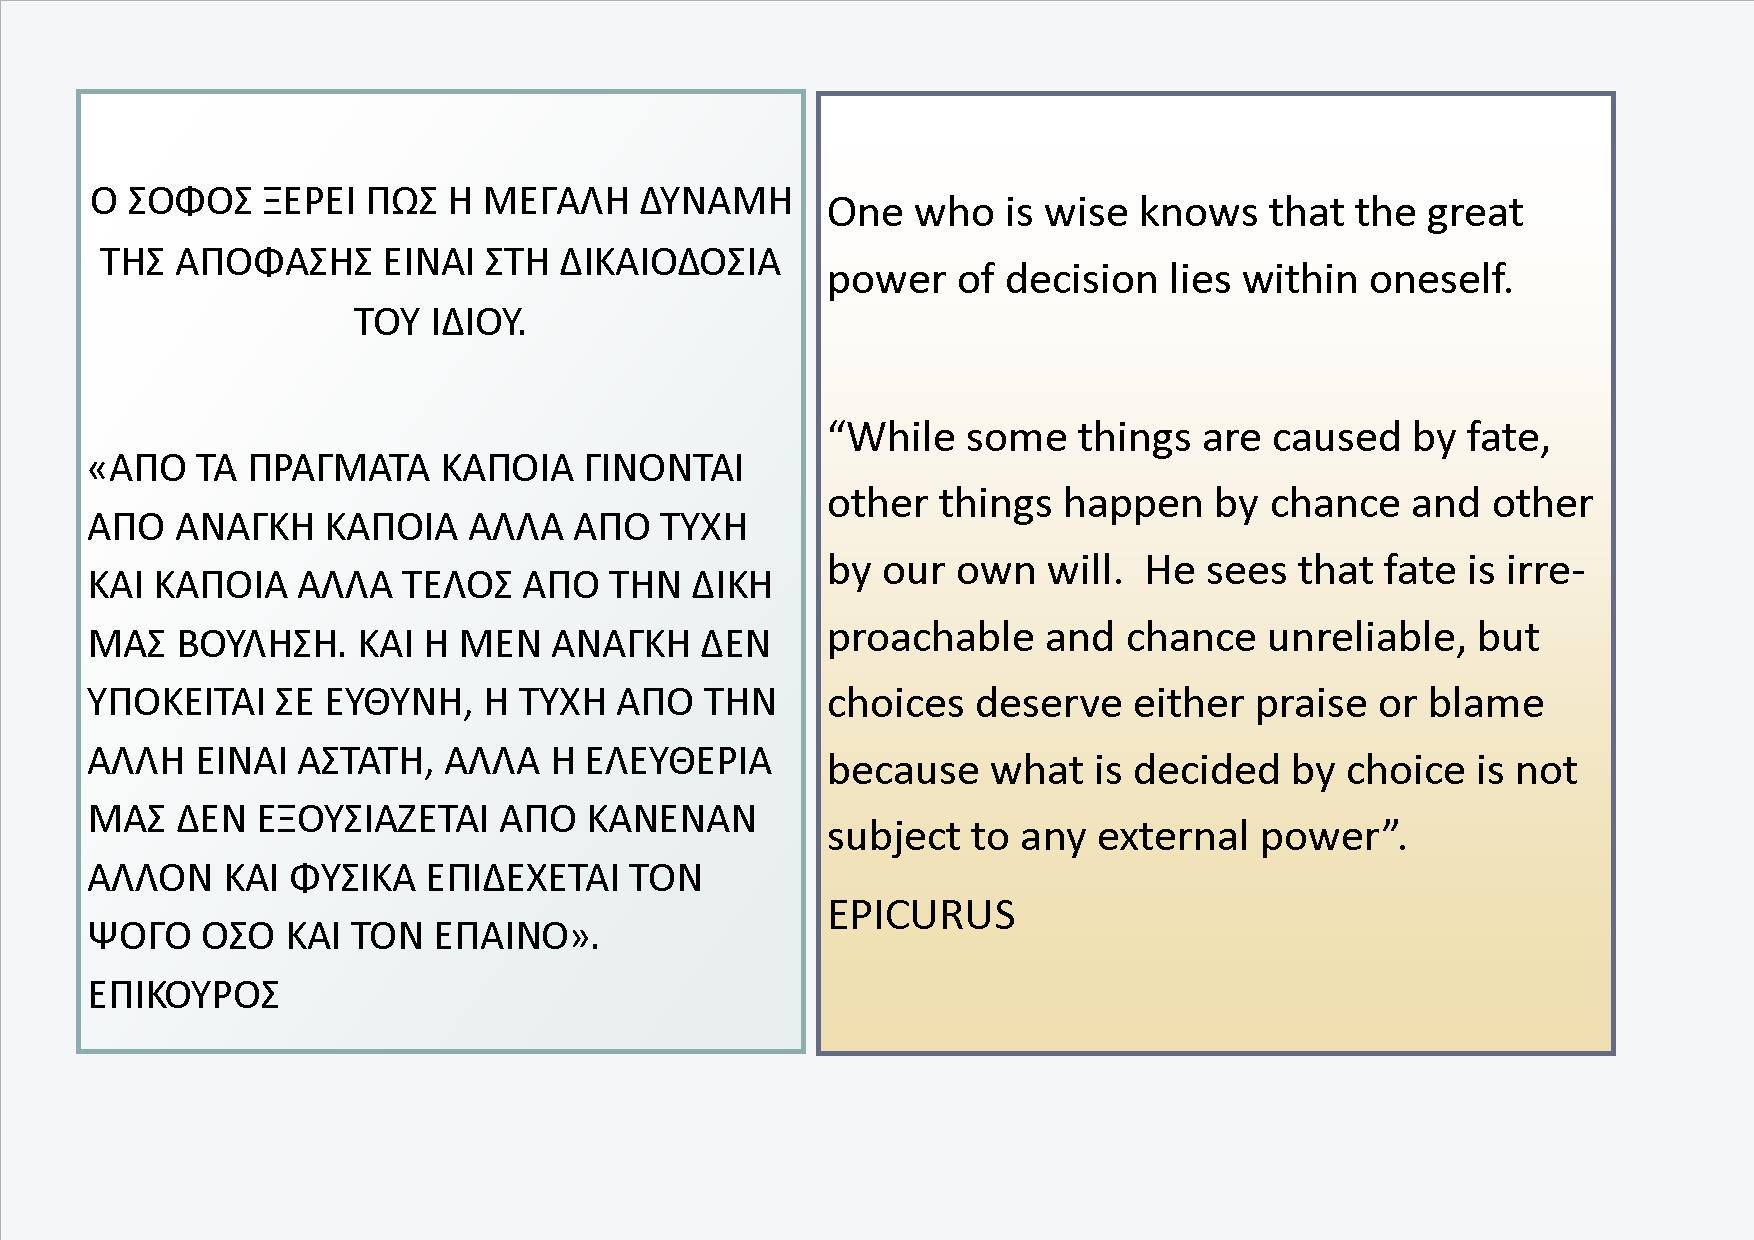 Epicurus on Free Will (Letter to Menoeceus)